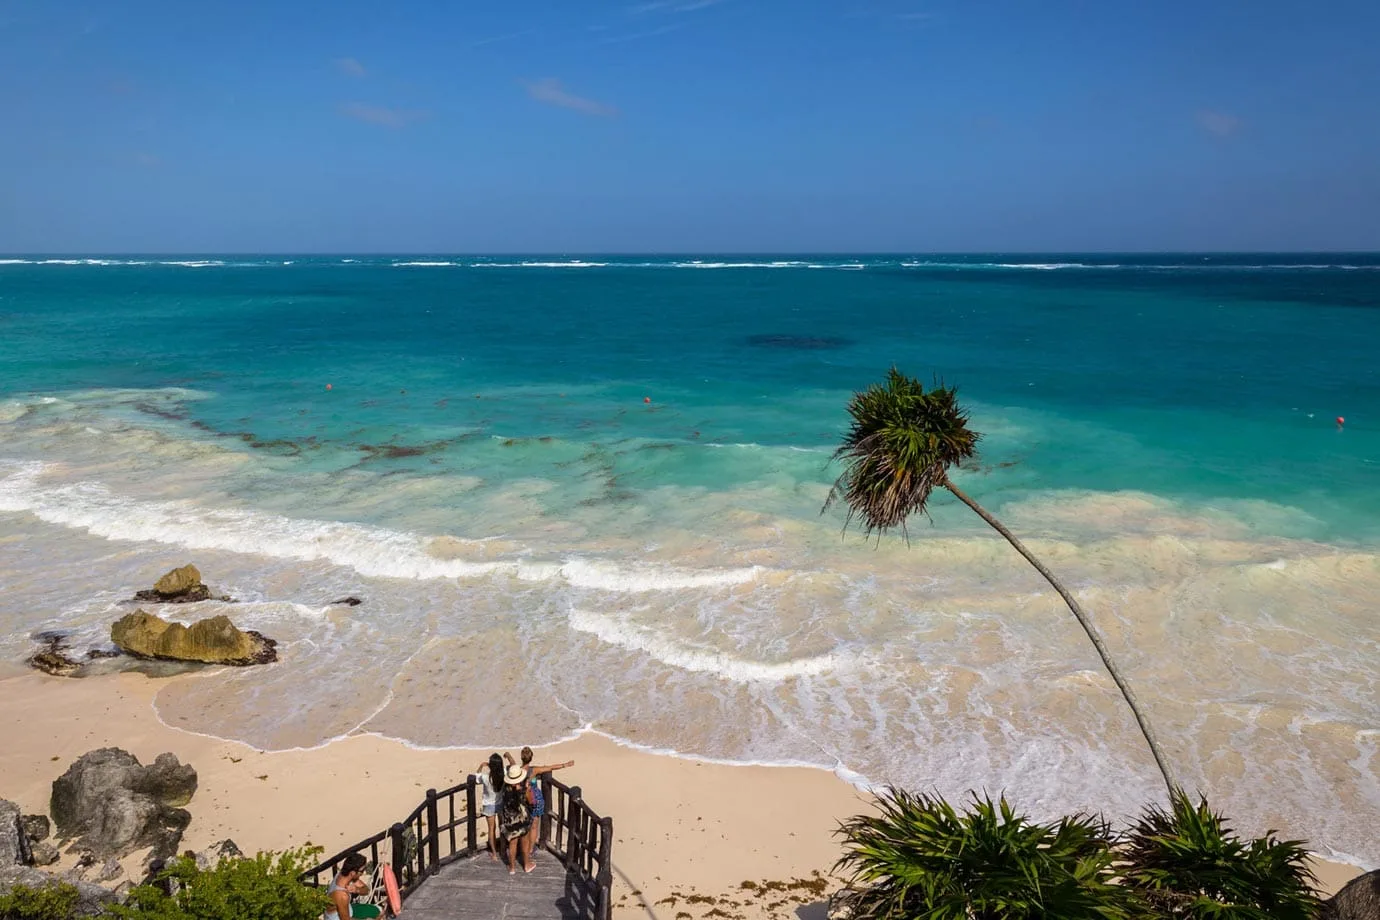 best things to do in cancun